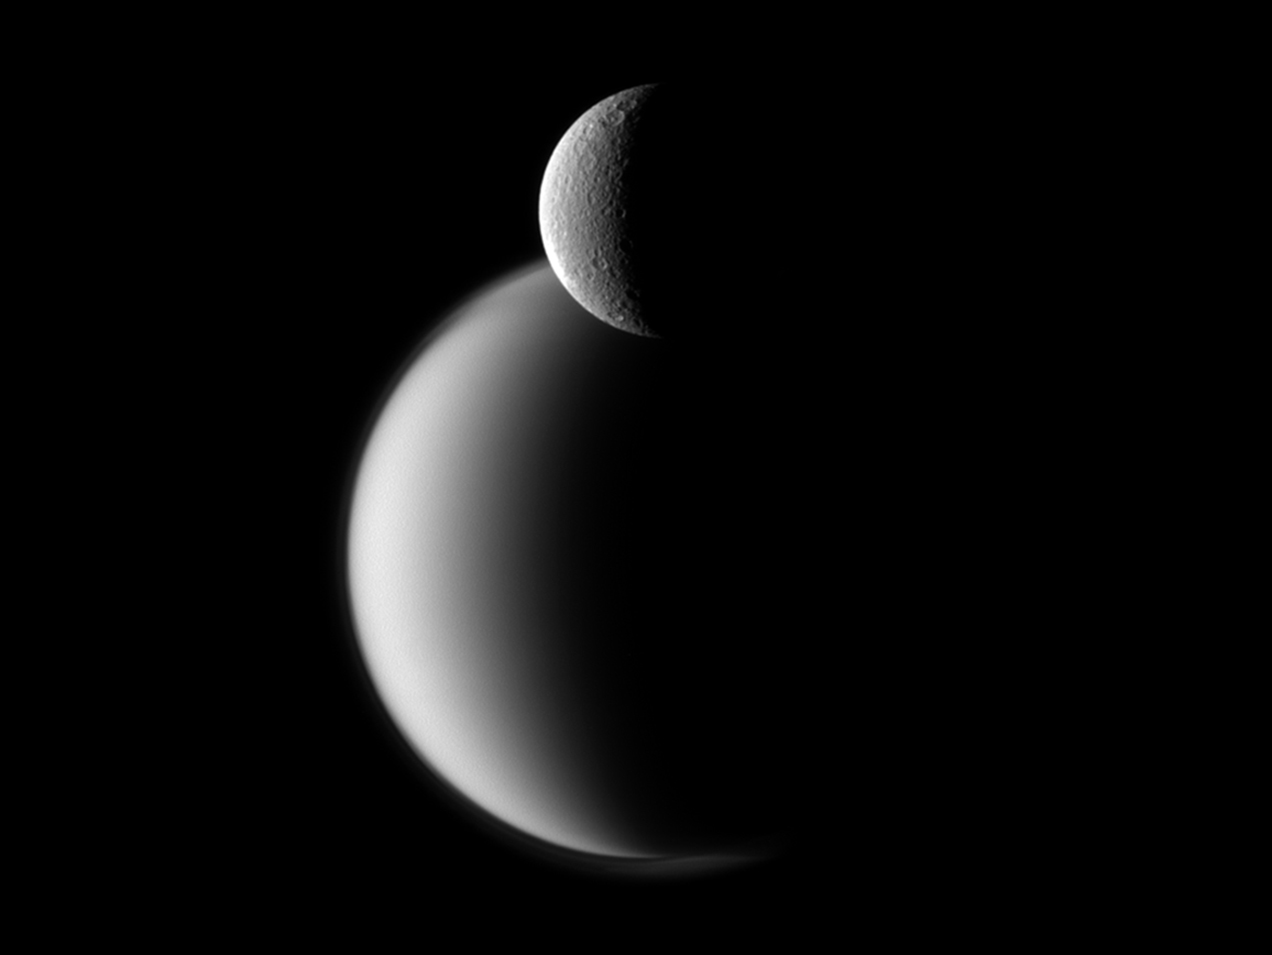 Rhea (front) and the much larger Titan (back). (Image: NASA/JPL-Caltech/Space Science Institute, Fair Use)